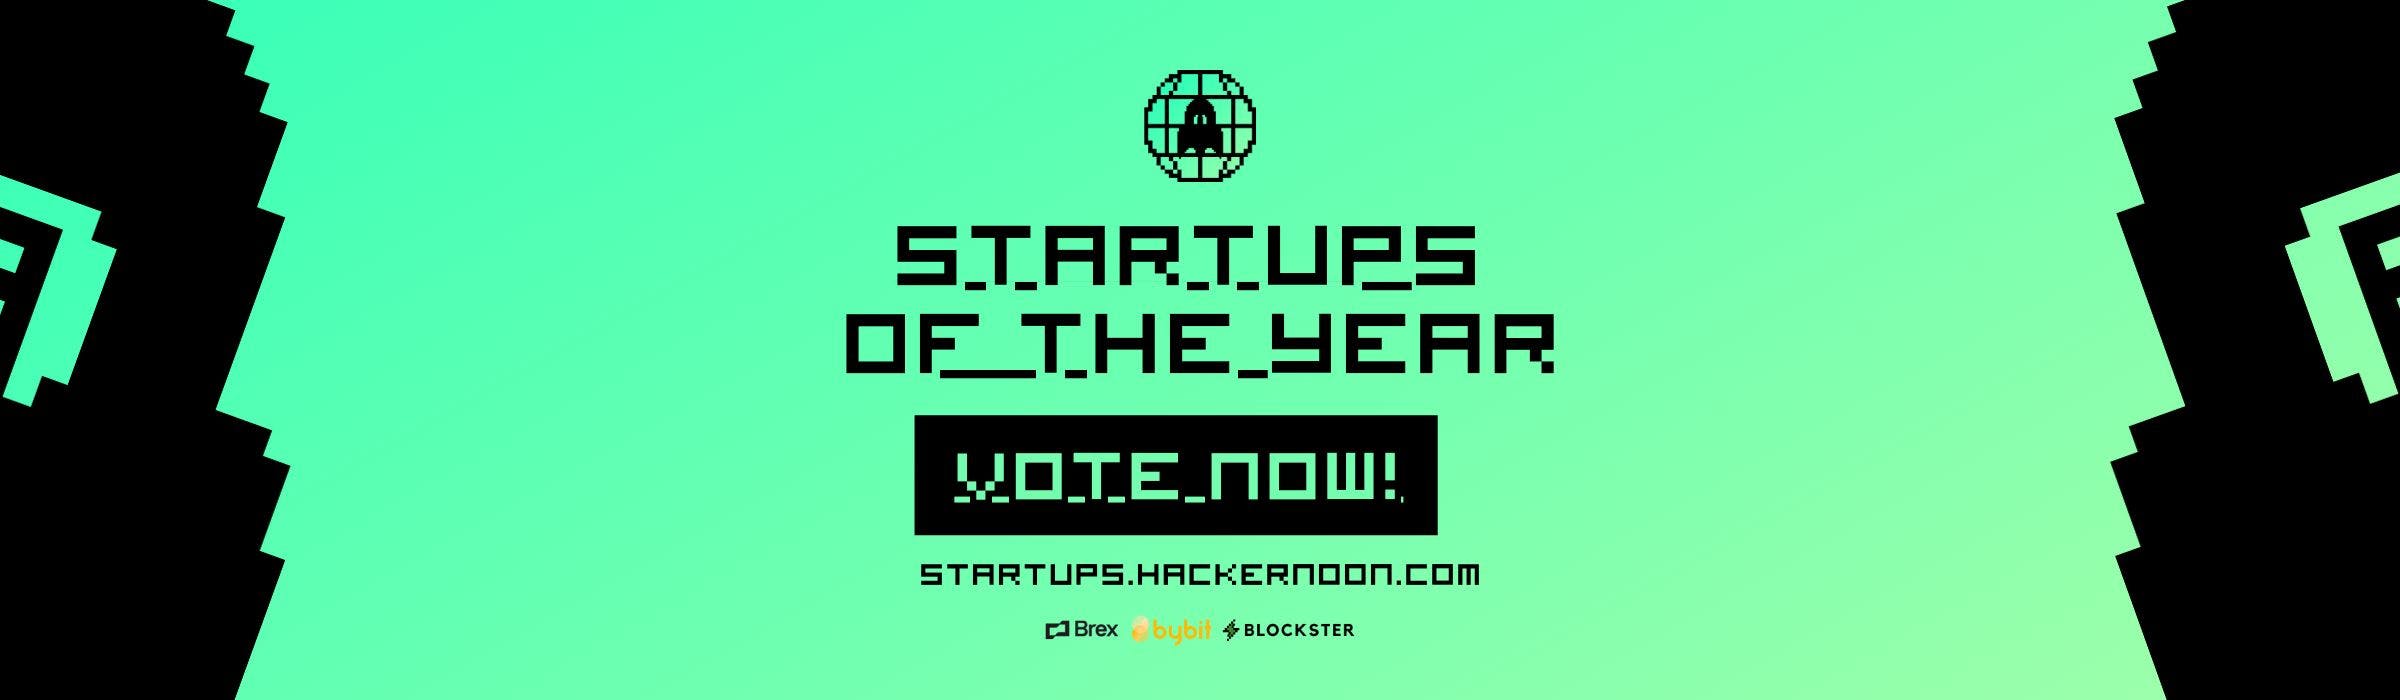 /vote-now-for-the-worldwide-web-startups-of-the-year-2021-il4t35i8 feature image